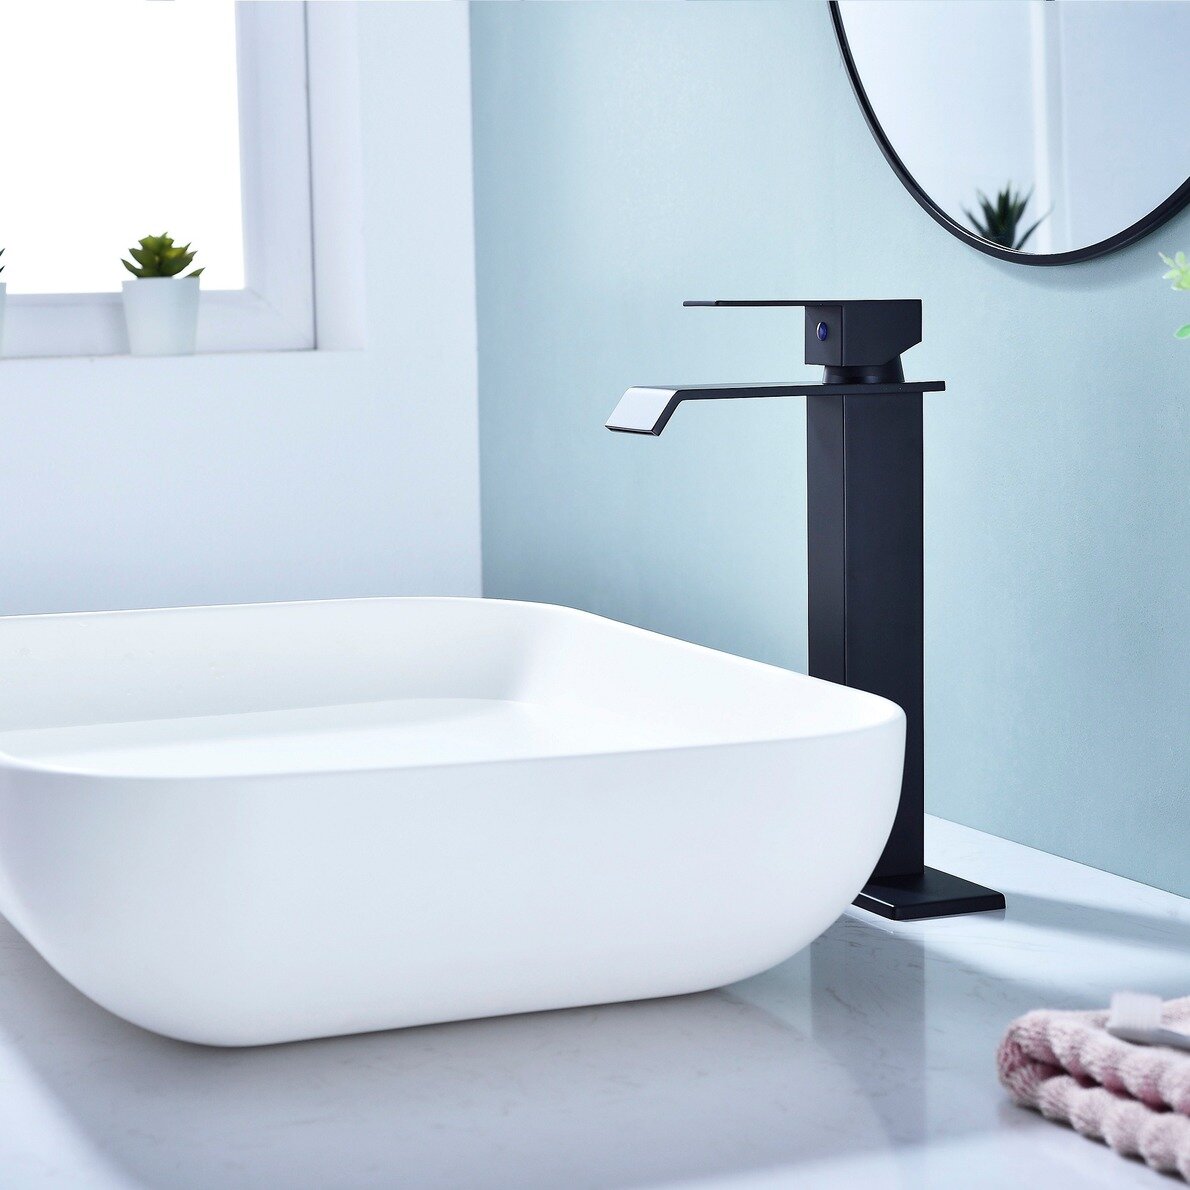 Details about   Black Bathroom Sink Faucet Hot &Cold Mixing Single Handle Vanity Basin Mixer Tap 